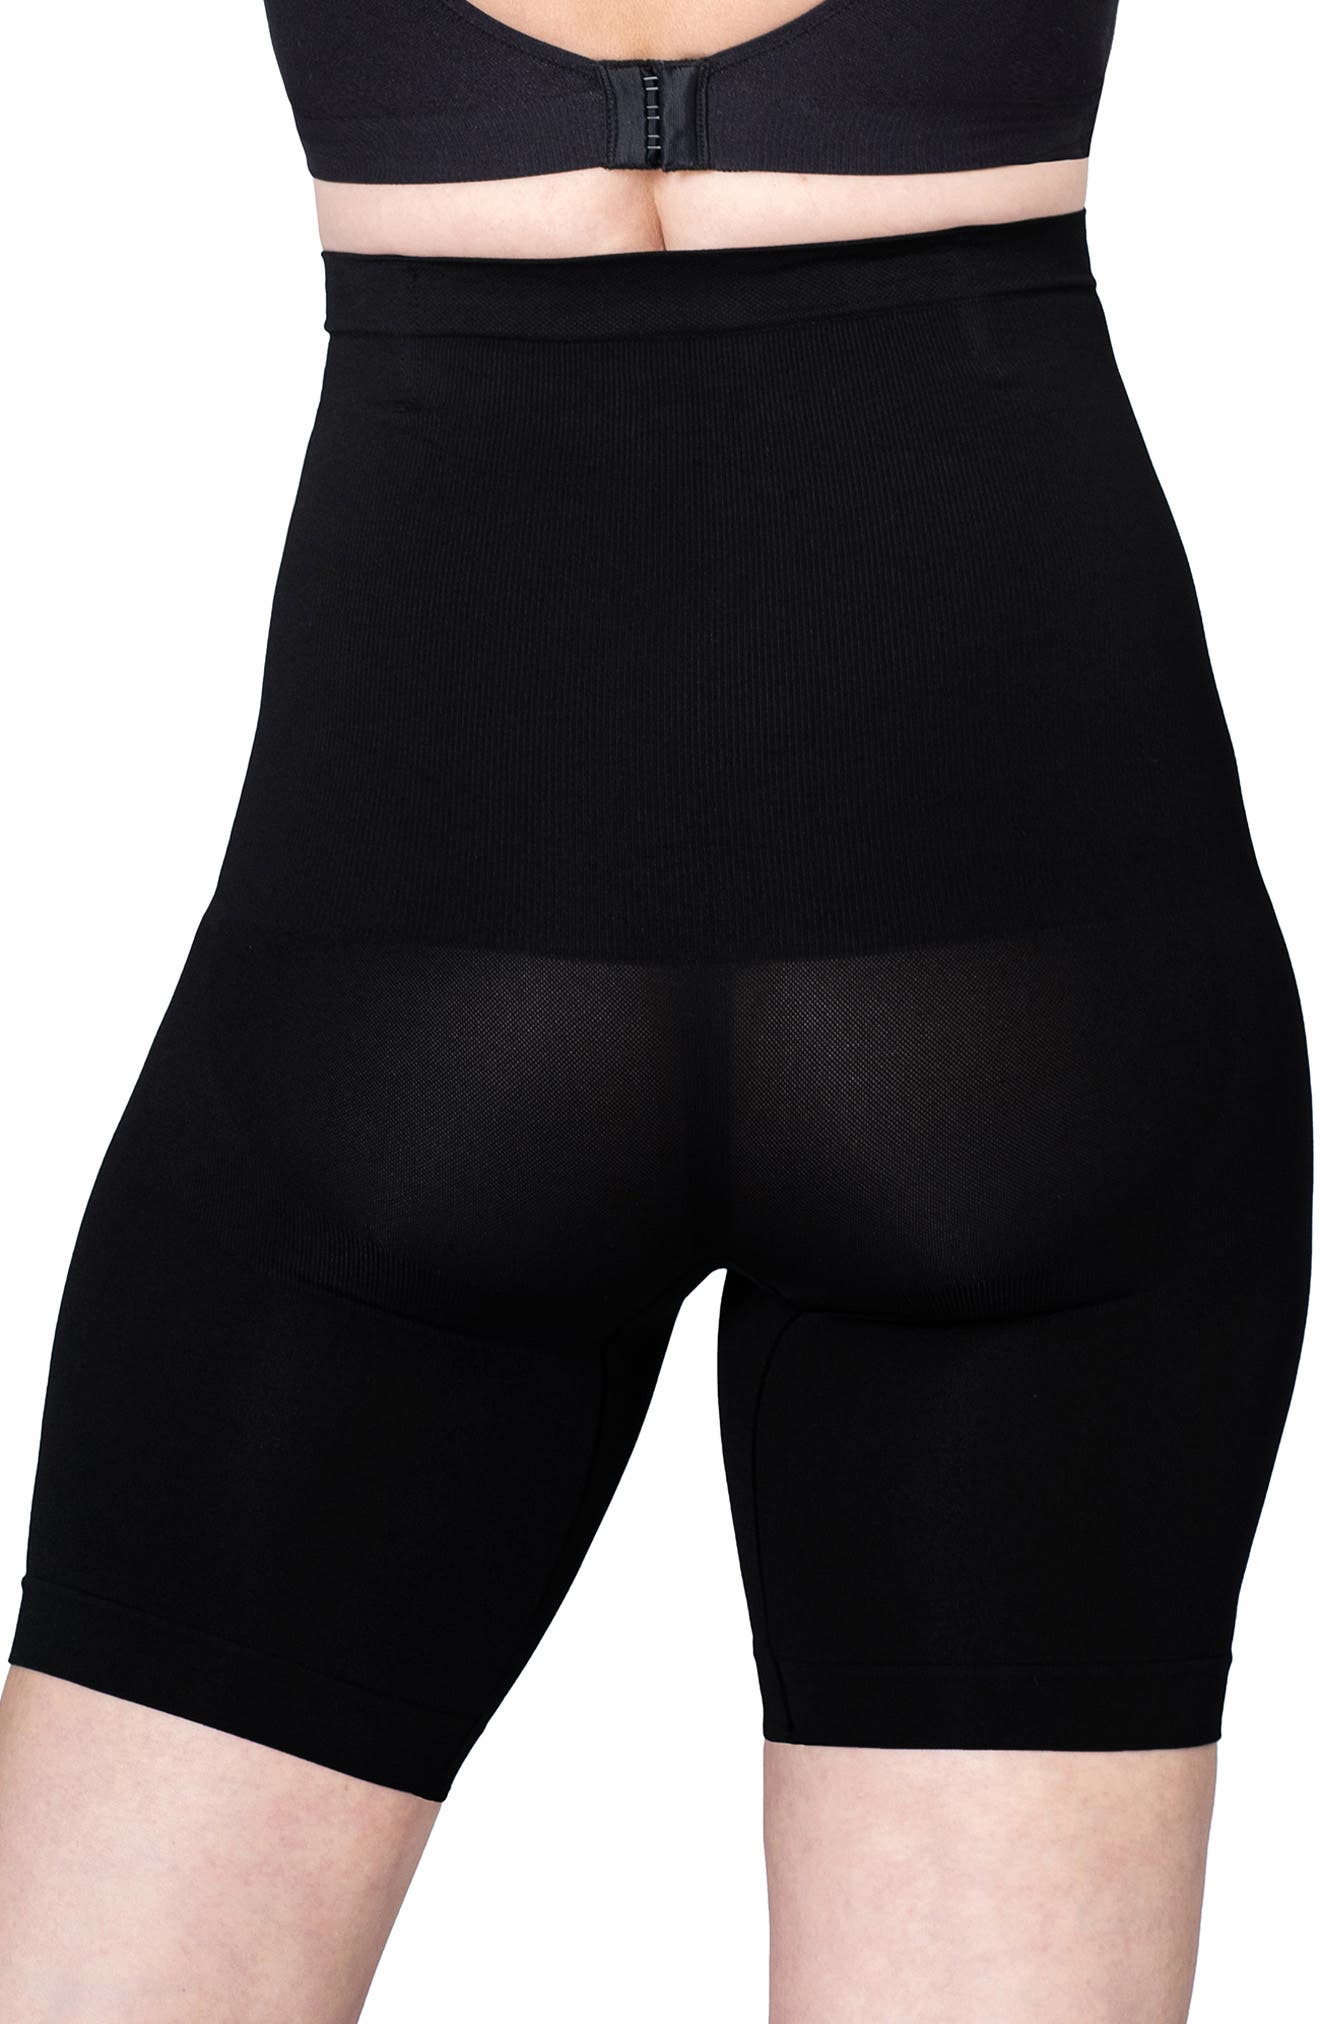 Surround Support® High Waist Shaping Shorts in Black at Nordstrom Nordstrom Women Clothing Underwear Shapewear 